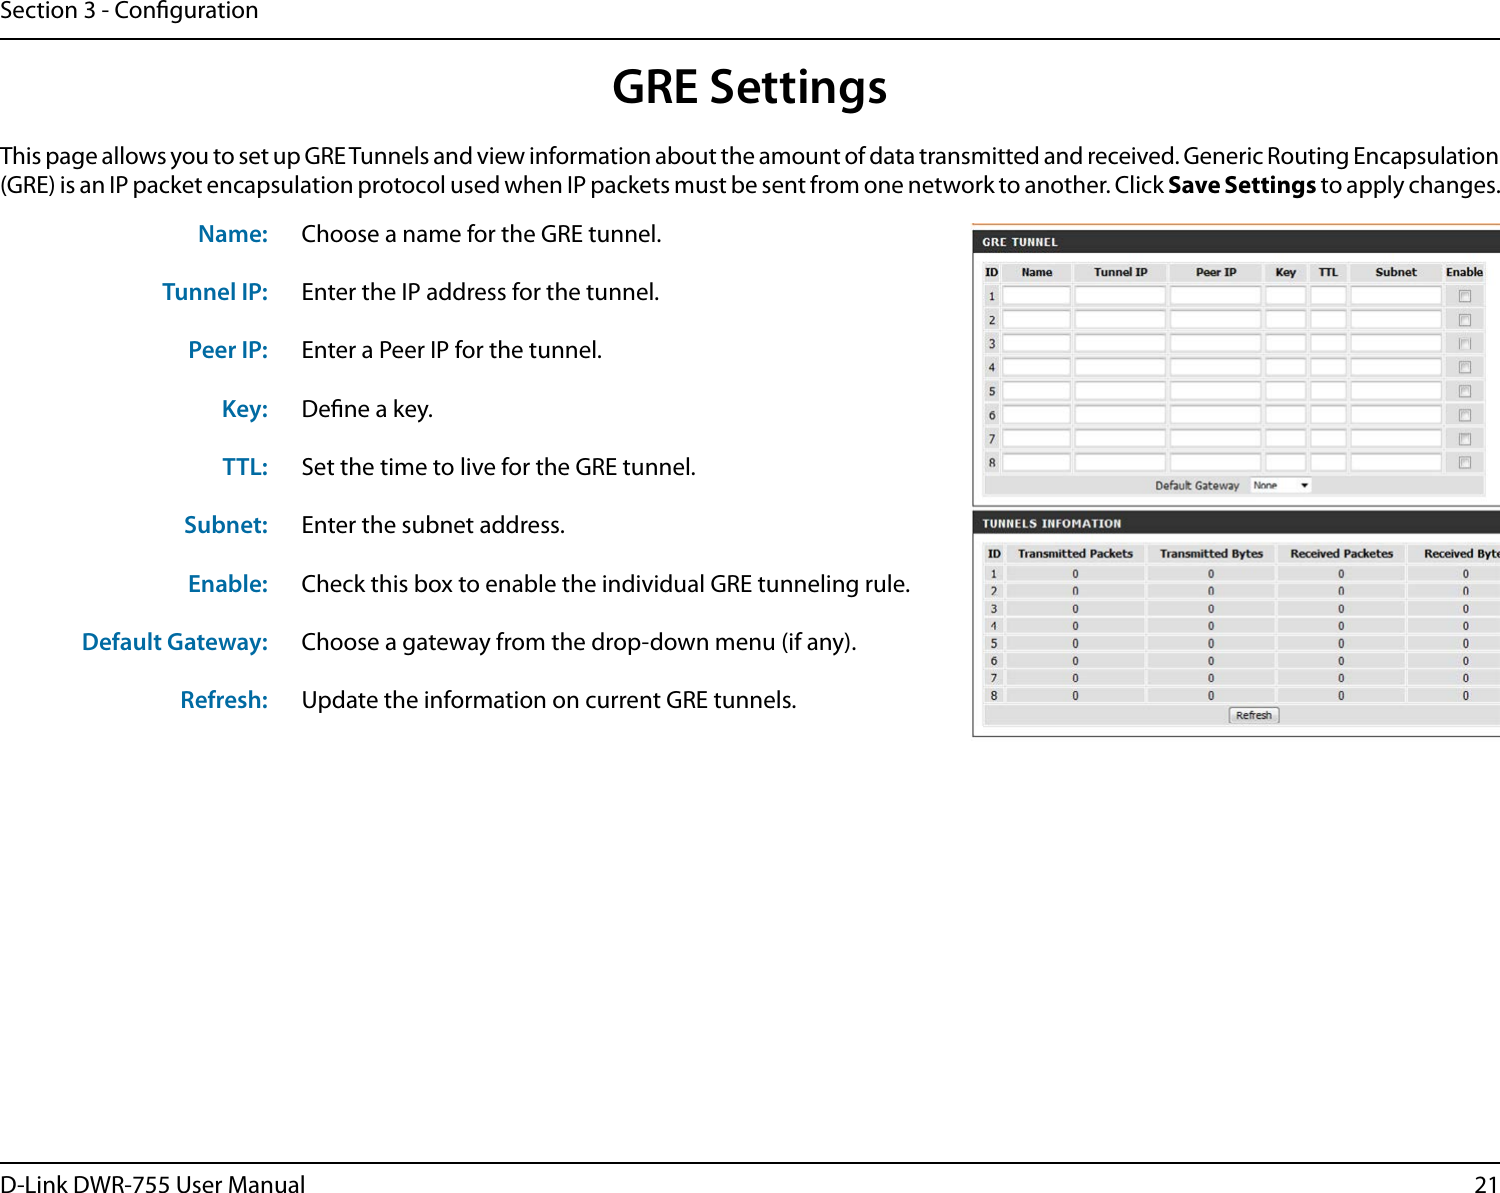 21D-Link DWR-755 User ManualSection 3 - CongurationGRE SettingsThis page allows you to set up GRE Tunnels and view information about the amount of data transmitted and received. Generic Routing Encapsulation (GRE) is an IP packet encapsulation protocol used when IP packets must be sent from one network to another. Click Save Settings to apply changes.Choose a name for the GRE tunnel.Enter the IP address for the tunnel.Enter a Peer IP for the tunnel.Dene a key.Set the time to live for the GRE tunnel.Enter the subnet address.Check this box to enable the individual GRE tunneling rule.Choose a gateway from the drop-down menu (if any).Update the information on current GRE tunnels.Name:Tunnel IP:Peer IP:Key:TTL:Subnet:Enable:Default Gateway:Refresh: